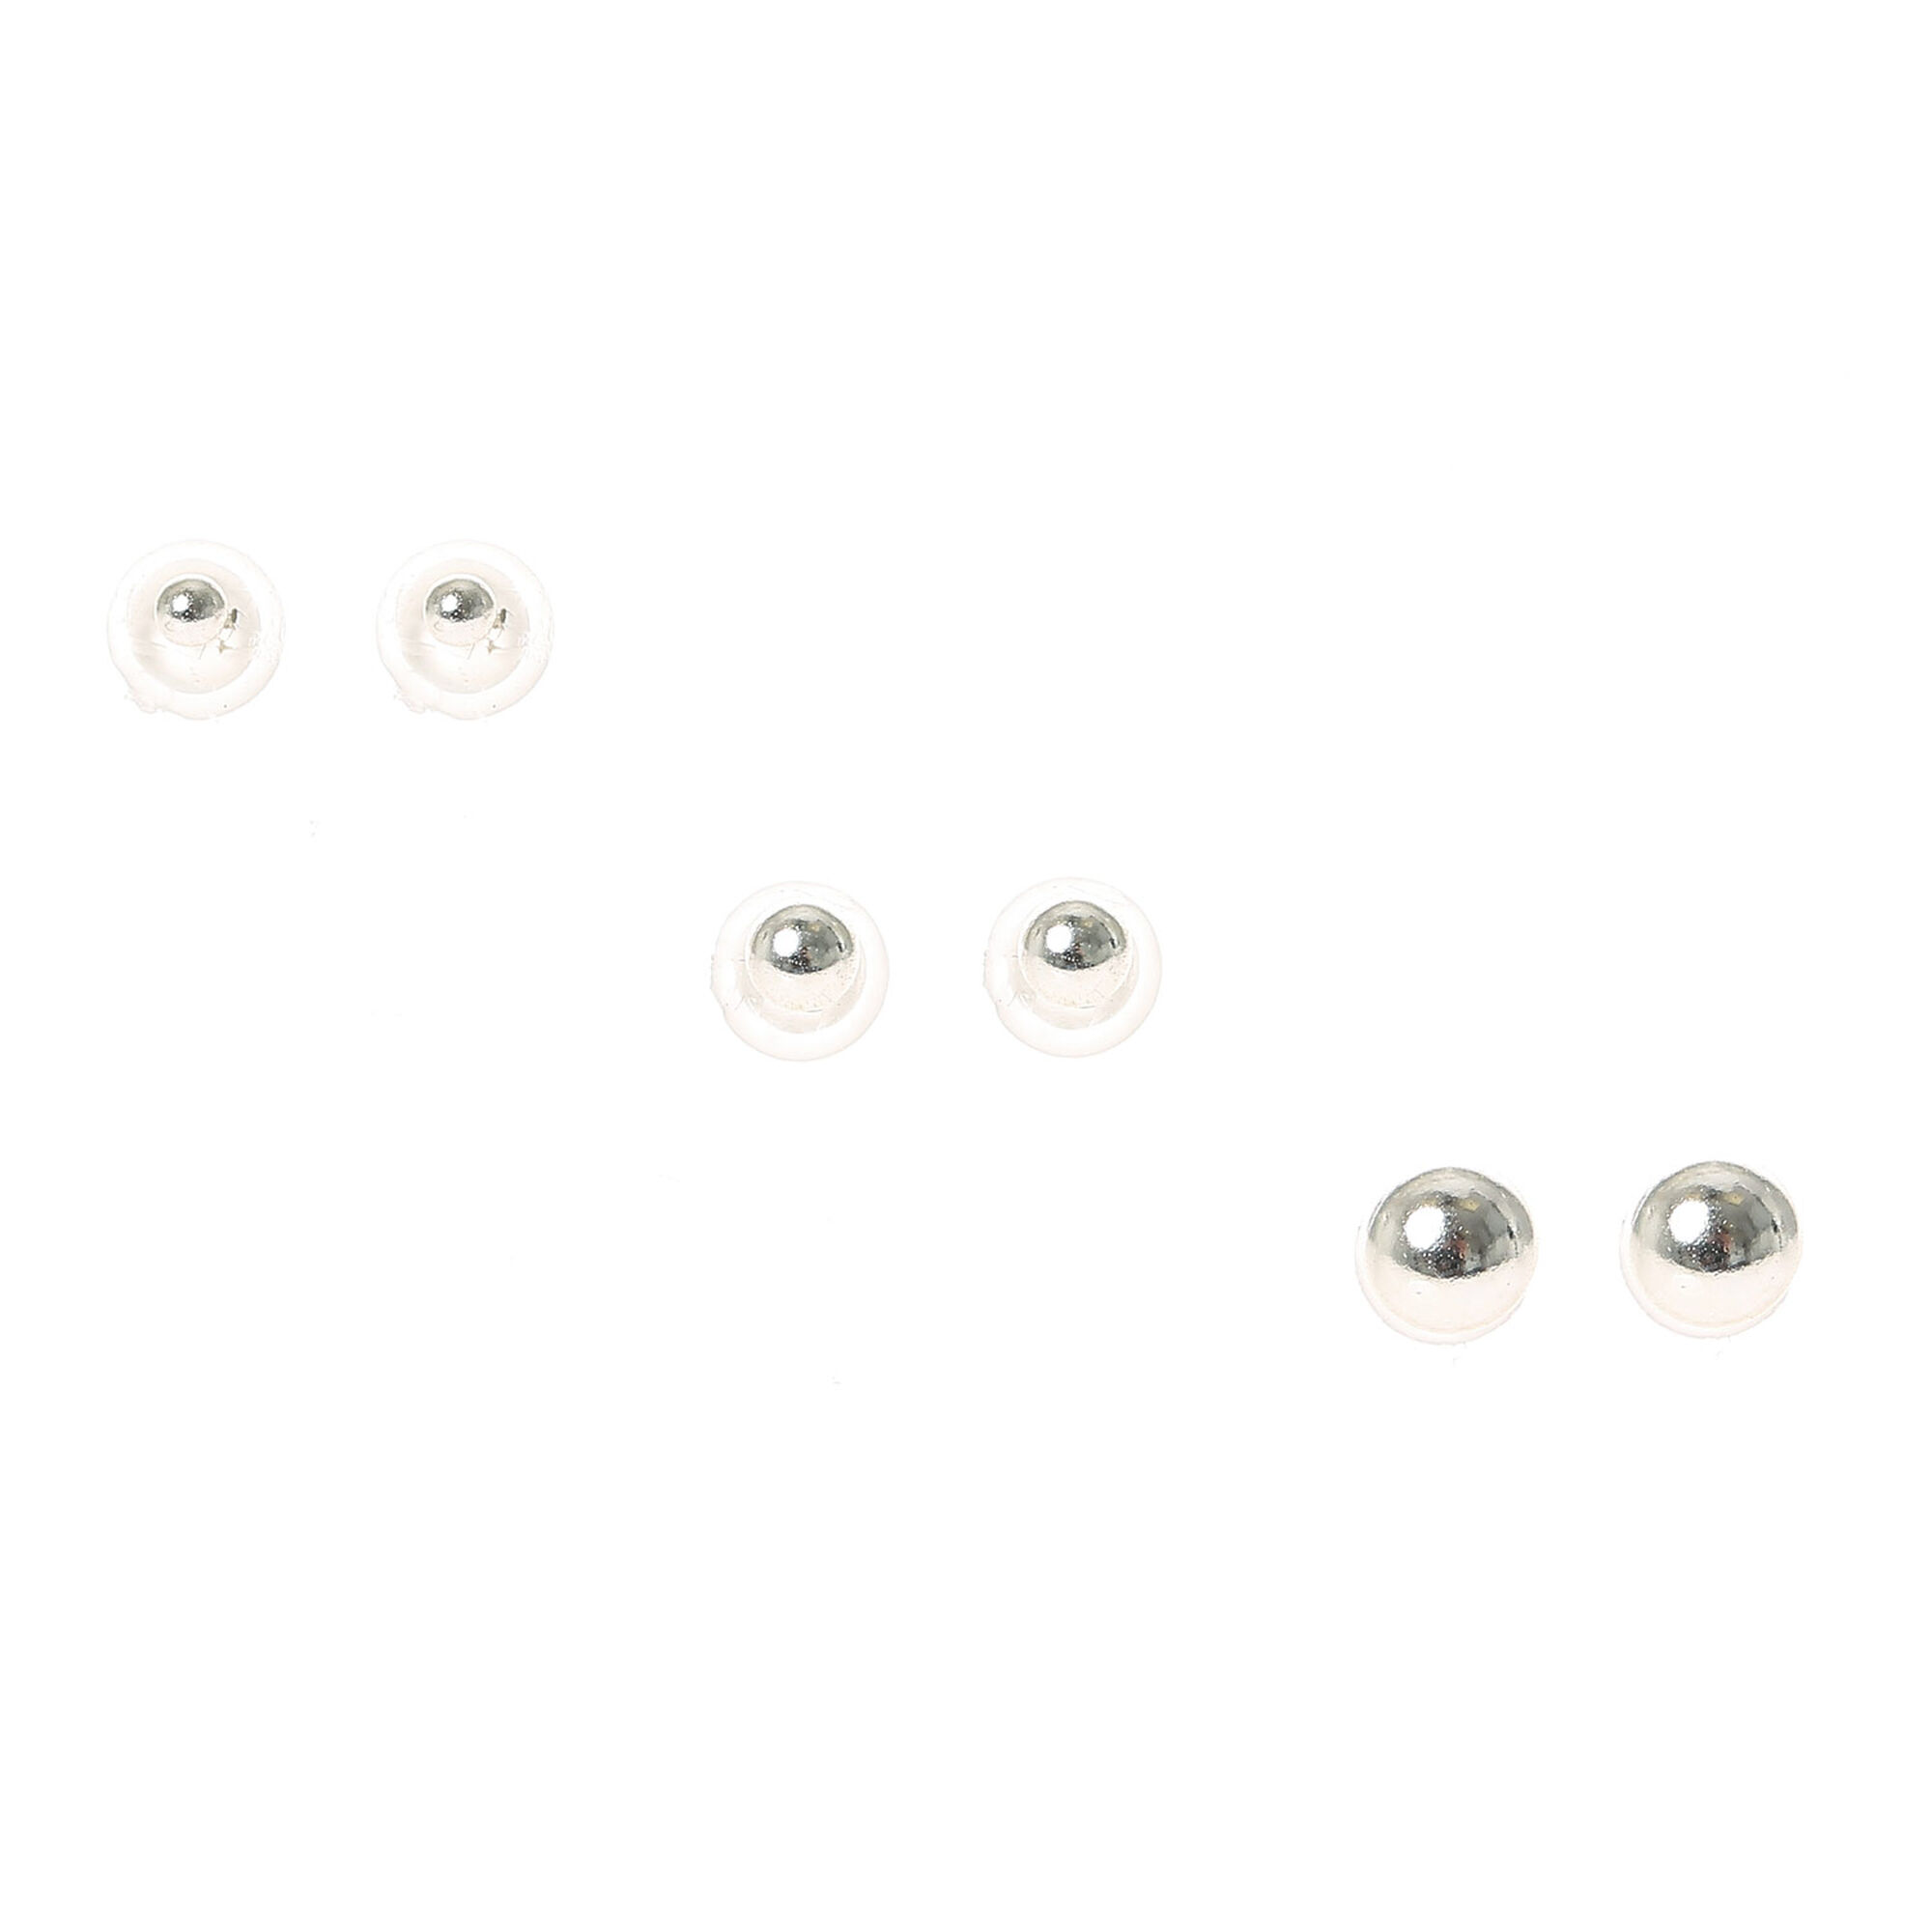 View Claires Gradual Ball Stud Earrings 3 Pack Silver information